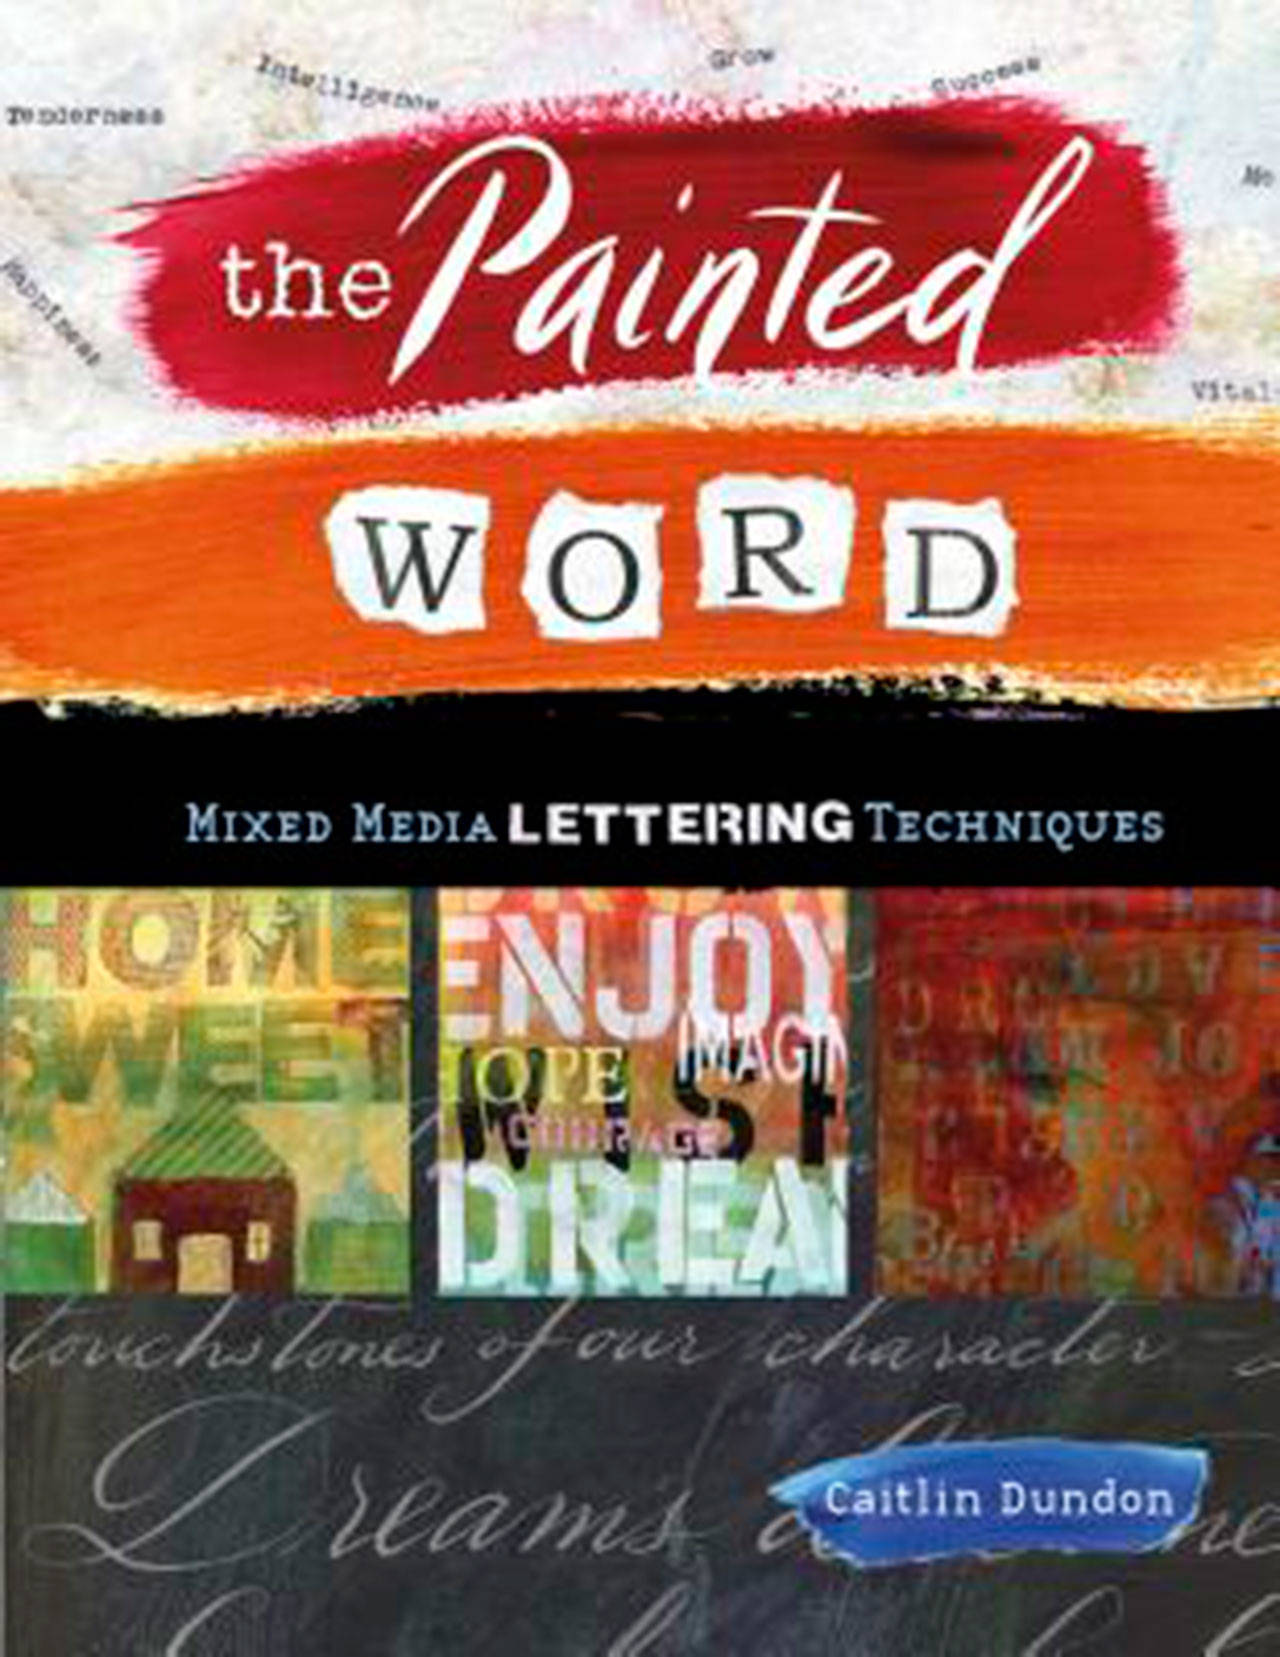 Image courtesy of Eagle Harbor Book Company | Caitlin Dundon, author of The Painted Word: Mixed Media Lettering Techniques, will visit Eagle Harbor Book Company at 6:30 p.m. Thursday, May 30.